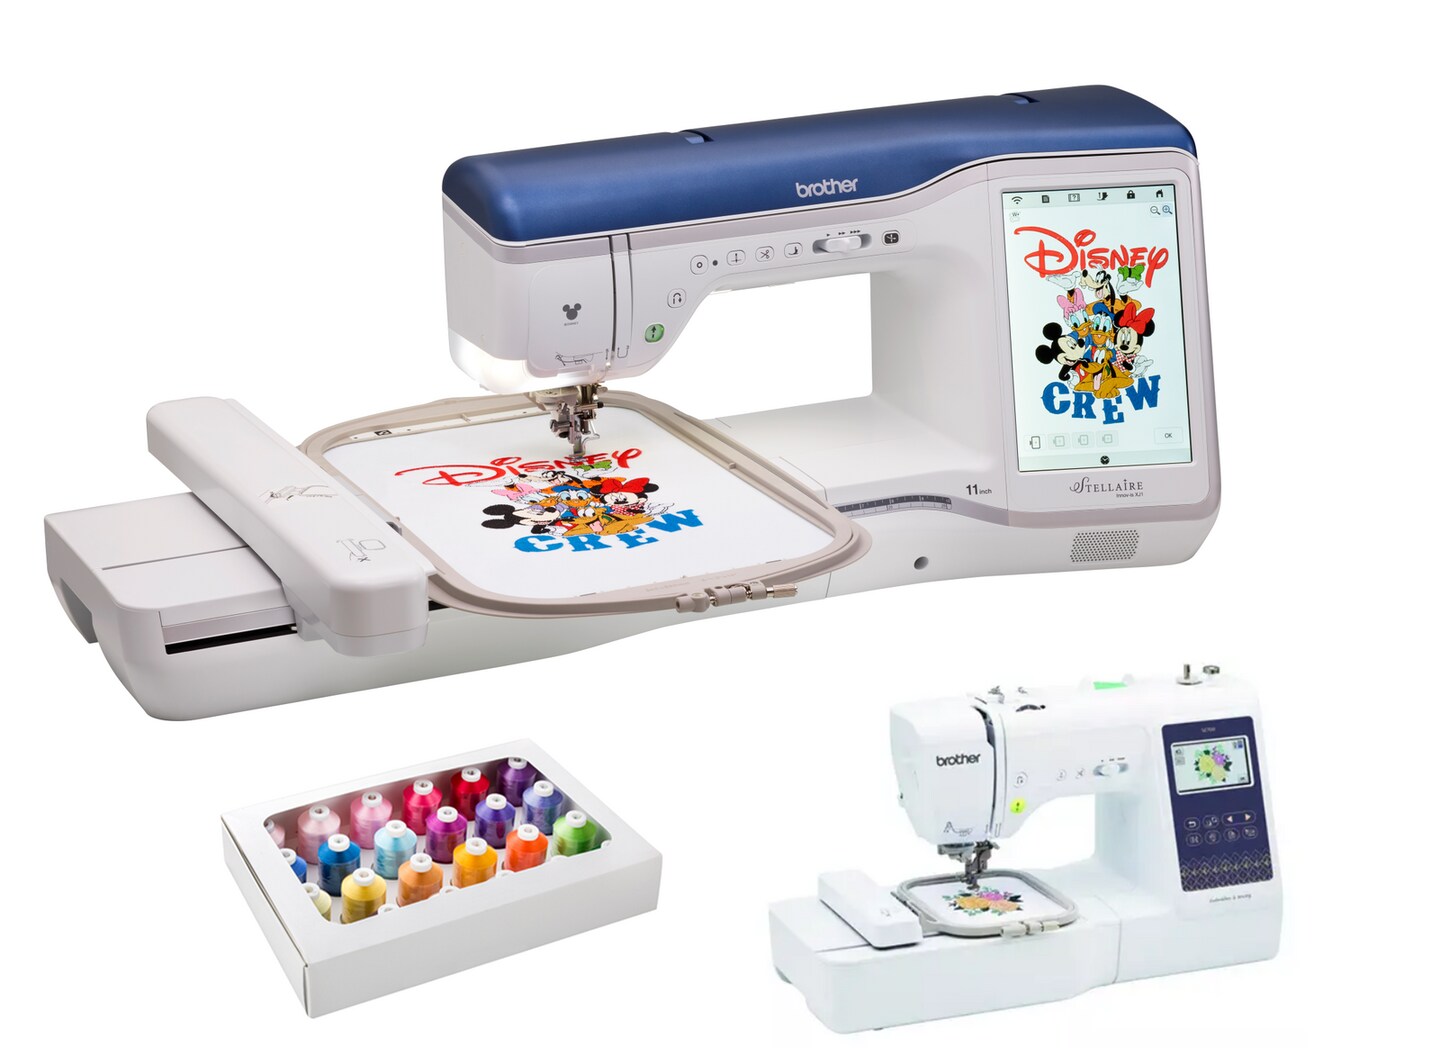 Brother SE700 Embroidery & Sewing Machine w/ Embroidery Bundle 